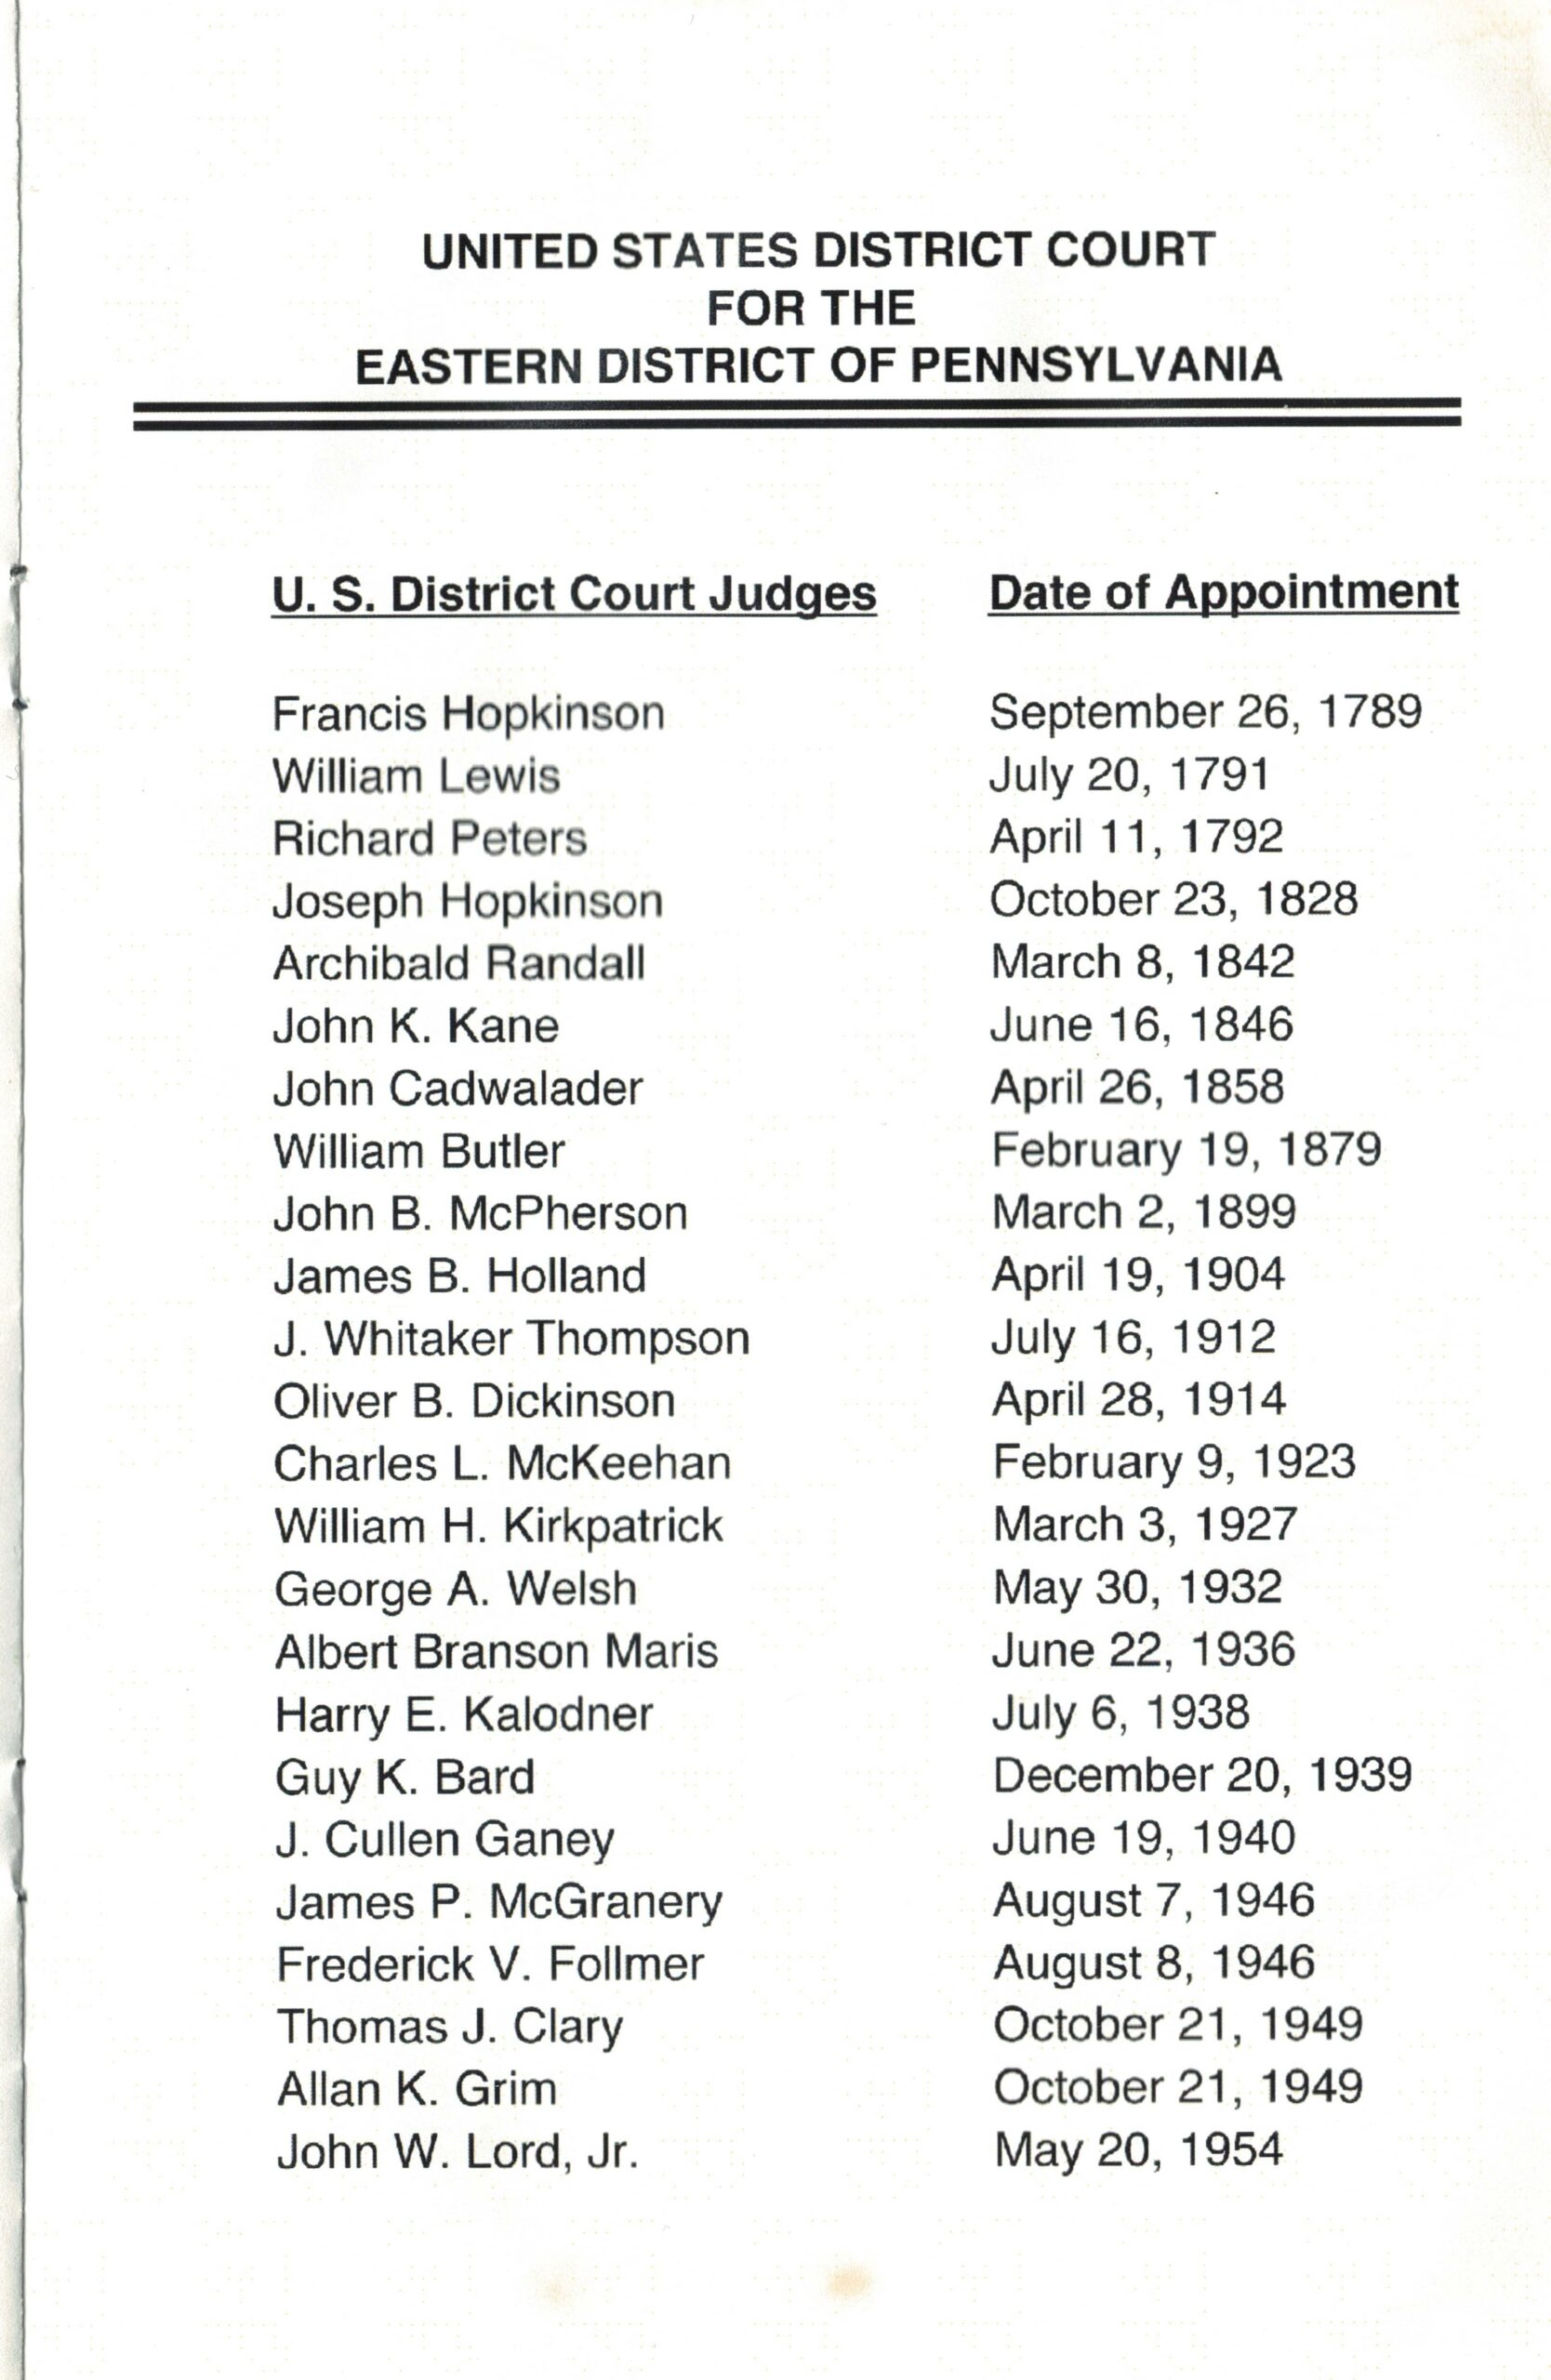 Eleventh page of the Jones program pamphlet with list of U.S. District Court judges and dates of appointment.